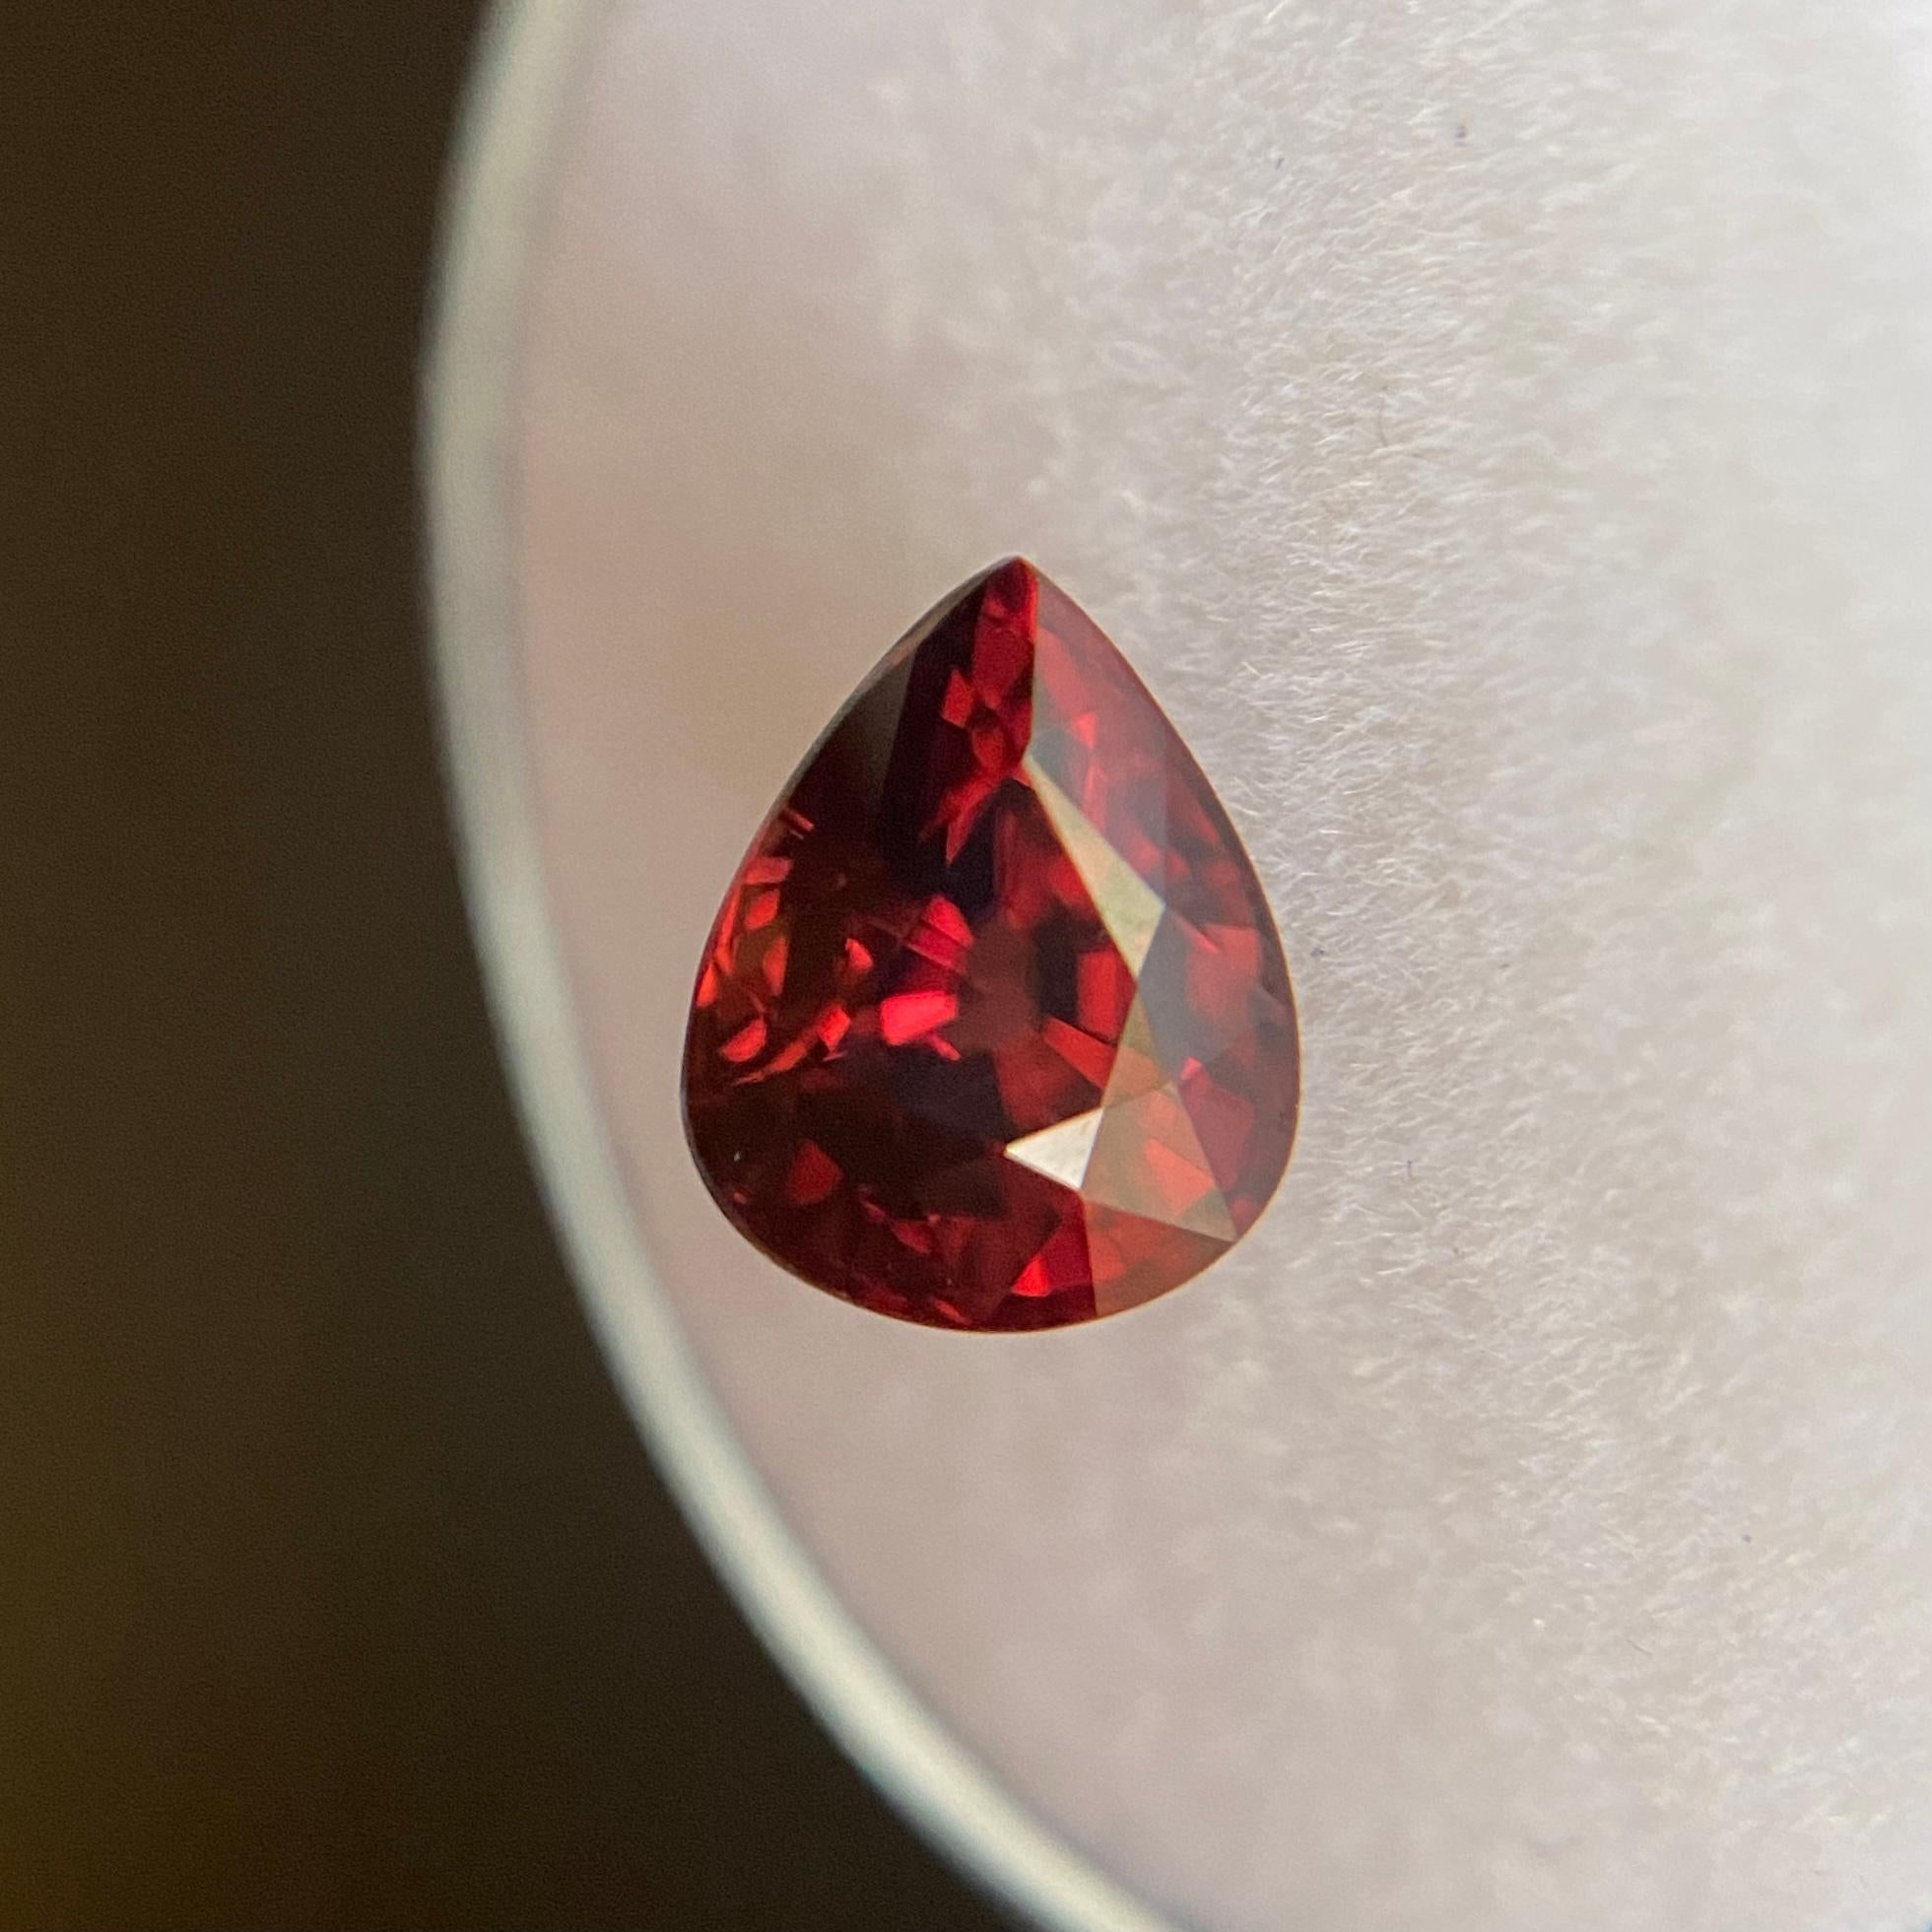 Deep Red Natural Zircon Gemstone.

2.37Carat with a beautiful deep red colour and excellent clarity. Clean stone with only some small natural inclusions visible when looking closely.
Also has an excellent pear teardrop cut with good proportions and